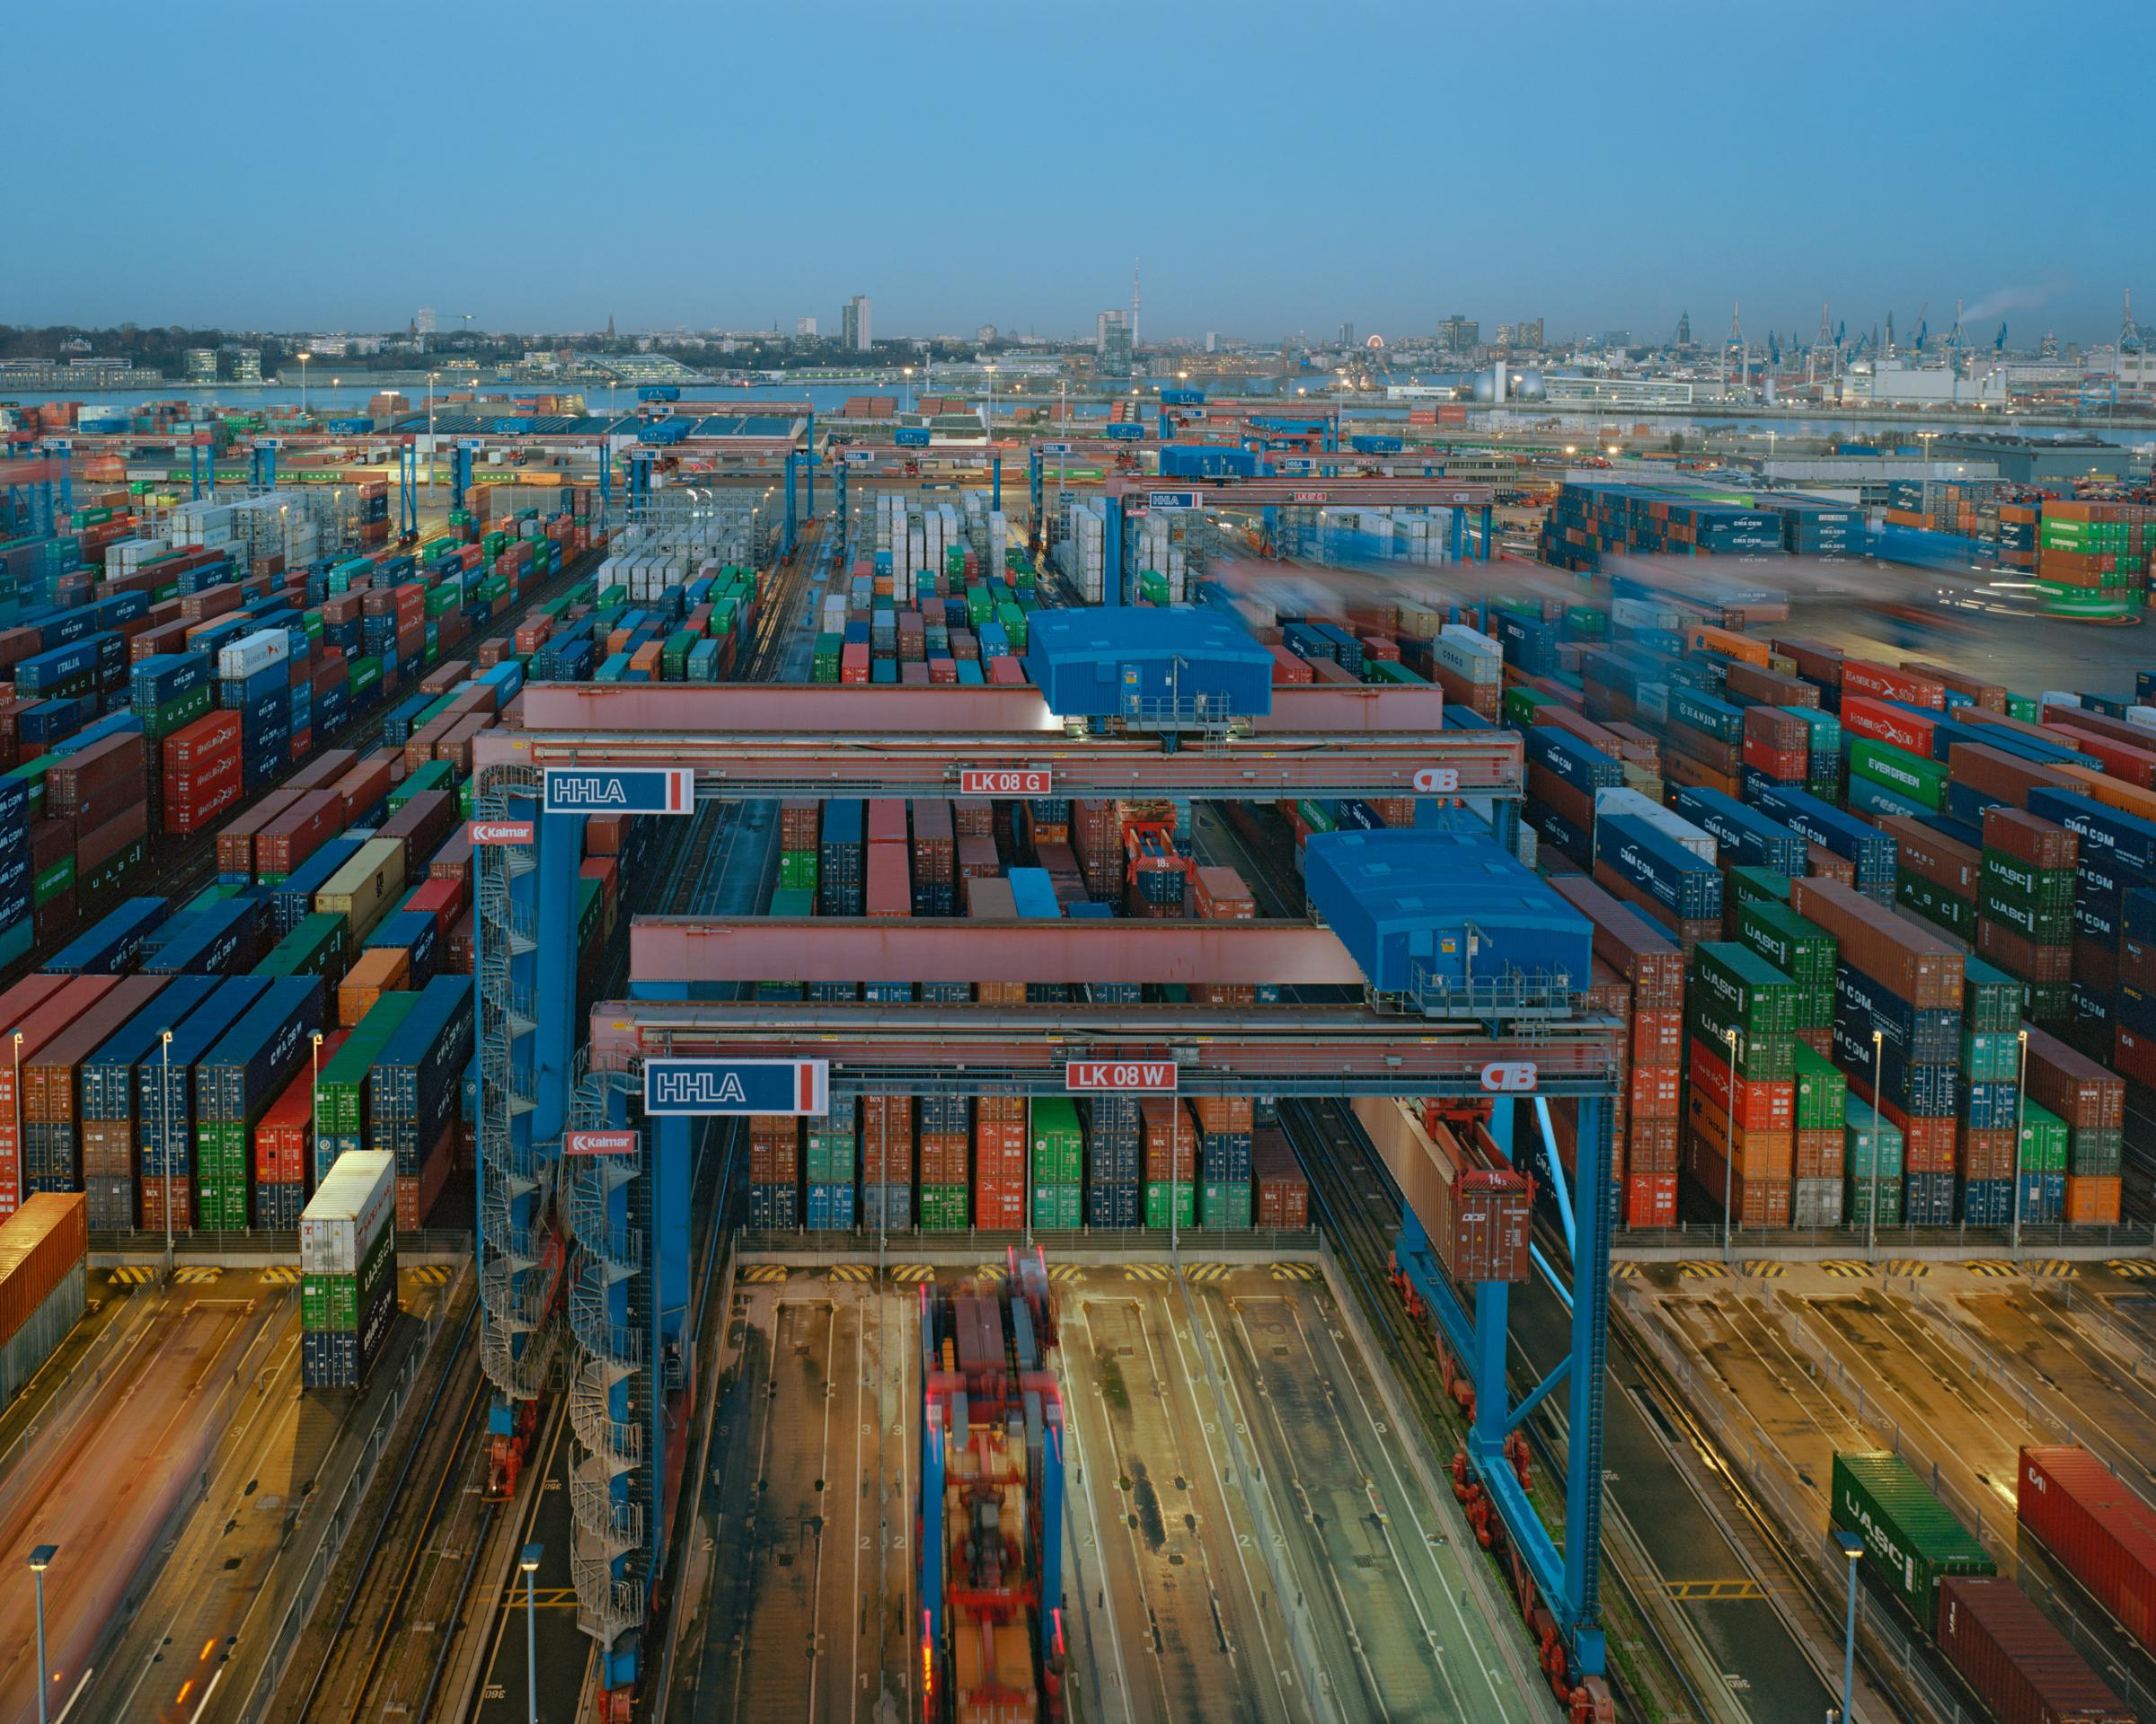 The HHLA Container Terminal Burchardkai in Hamburg, Germany. The port is called Germany's "Gateway to the World."